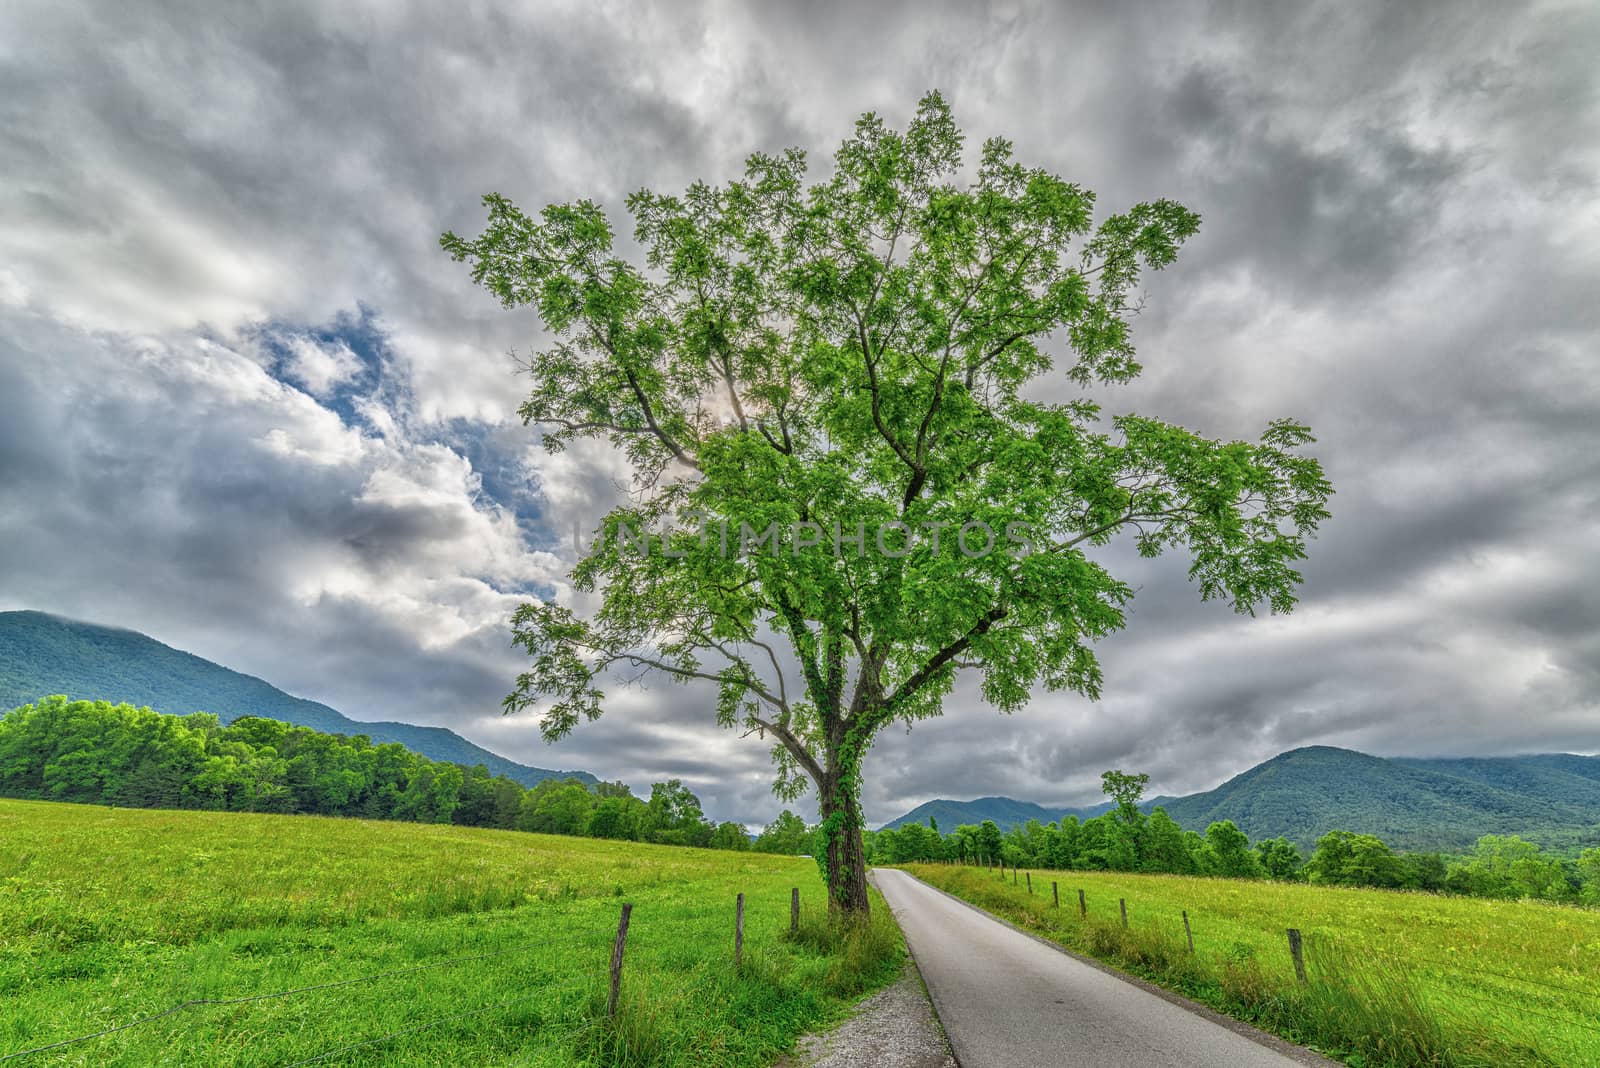 Cades Cove Tree in Springtime by stockbuster1